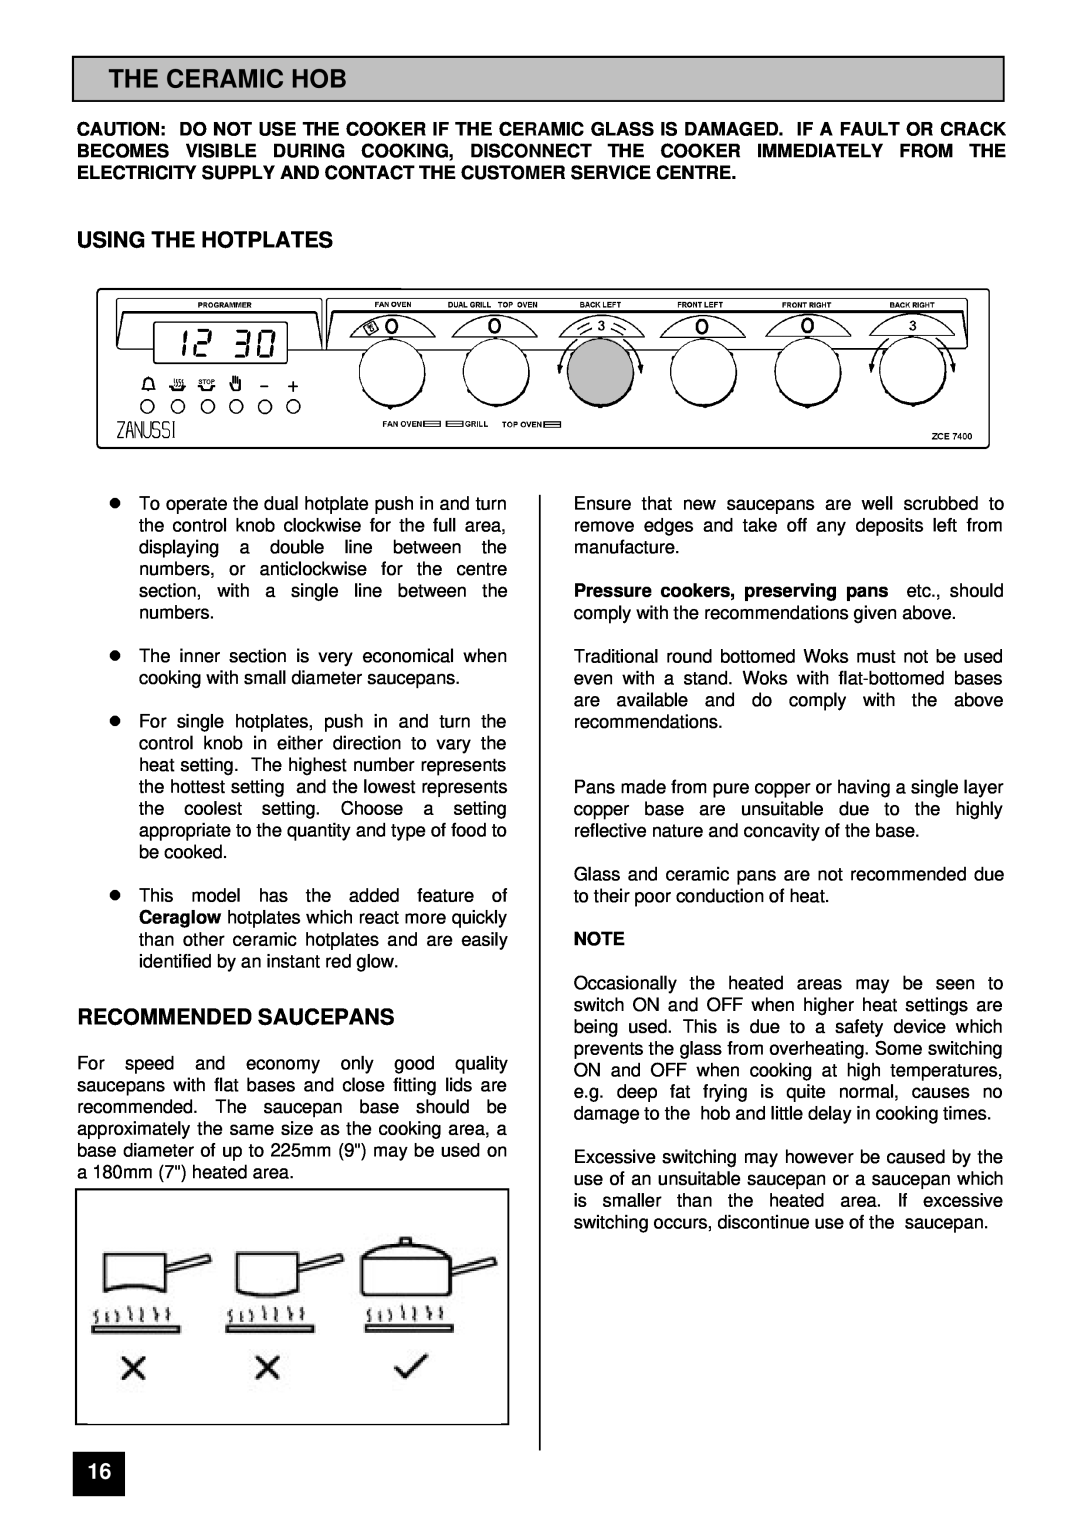 Zanussi ZCE 7400 manual The Ceramic Hob, Using The Hotplates, Recommended Saucepans 